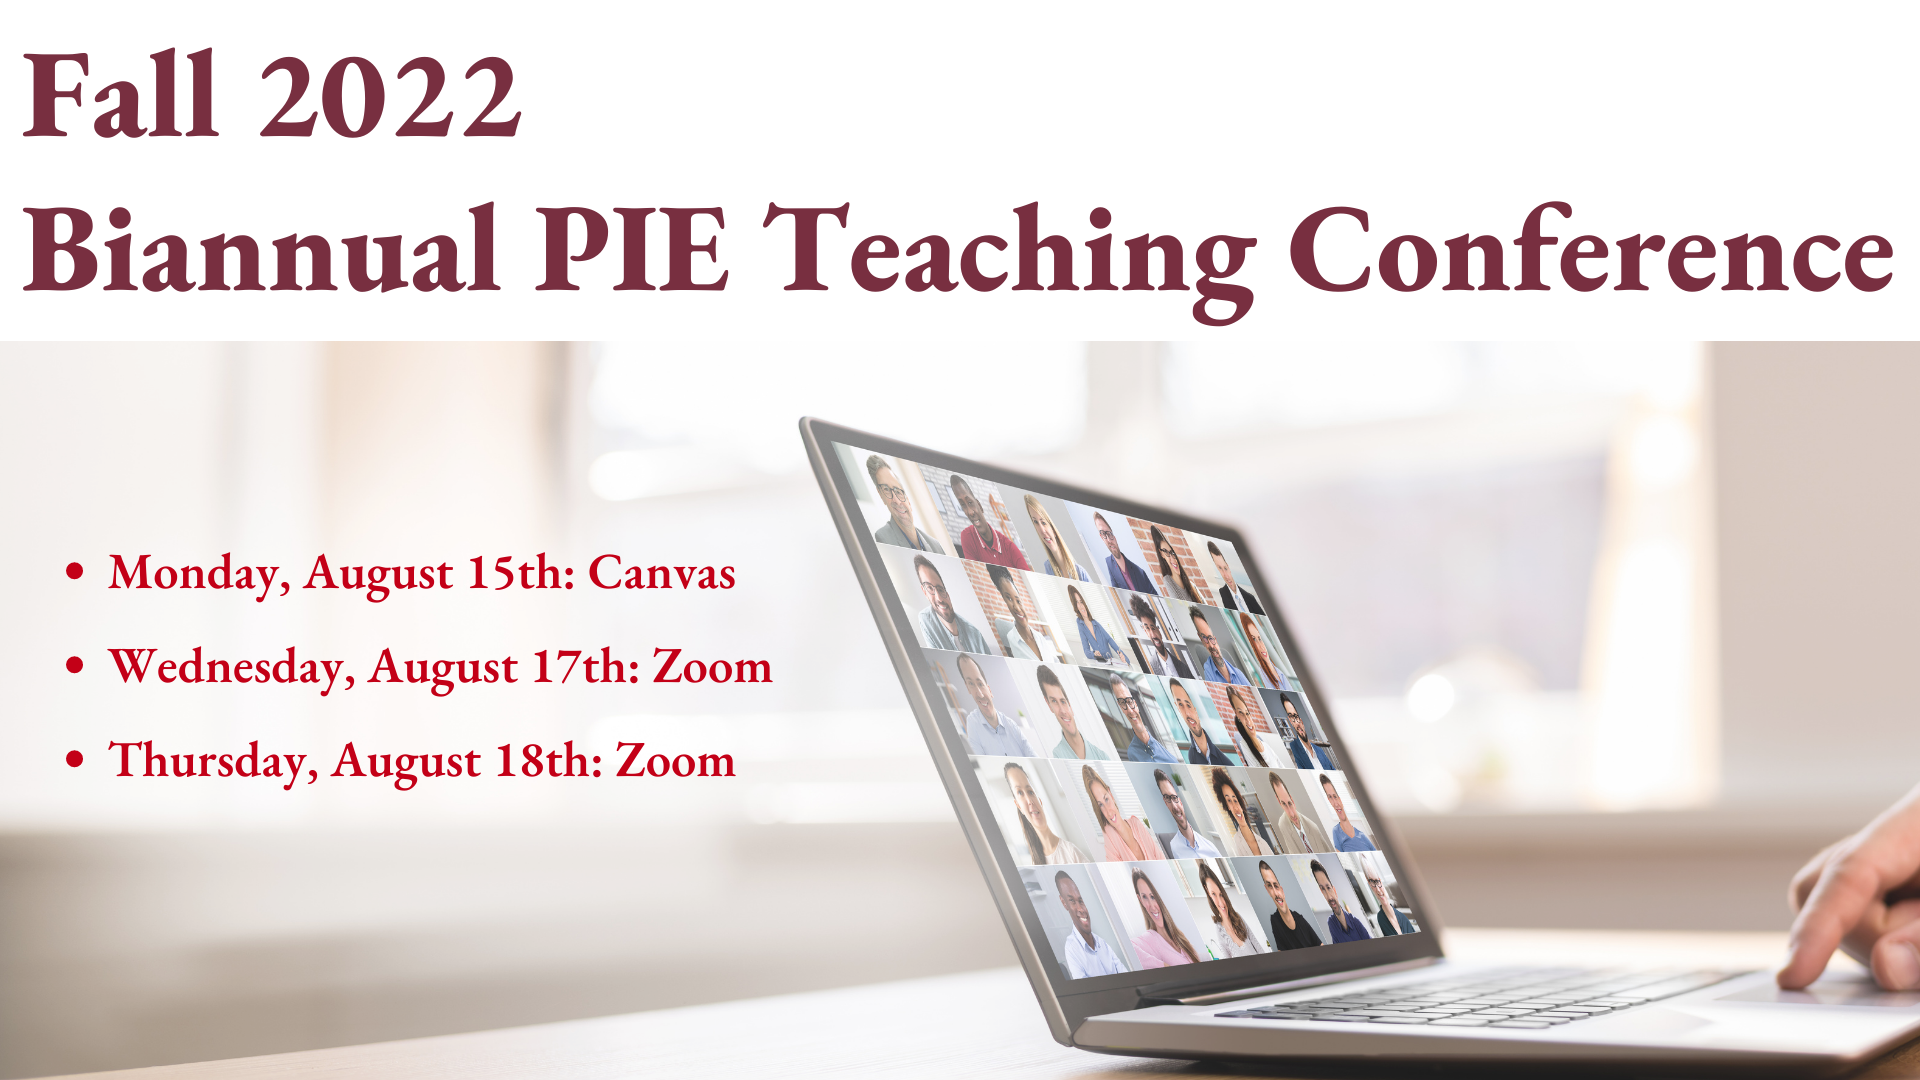 Fall 2022 Biannual PIE Teaching Conference; Monday, August 15th on Canvas; Wednesday, August 17th on Zoom; Thursday, August 18th on Zoom. Image of open laptop, screen with Zoom conference tiles, hand on trackpad